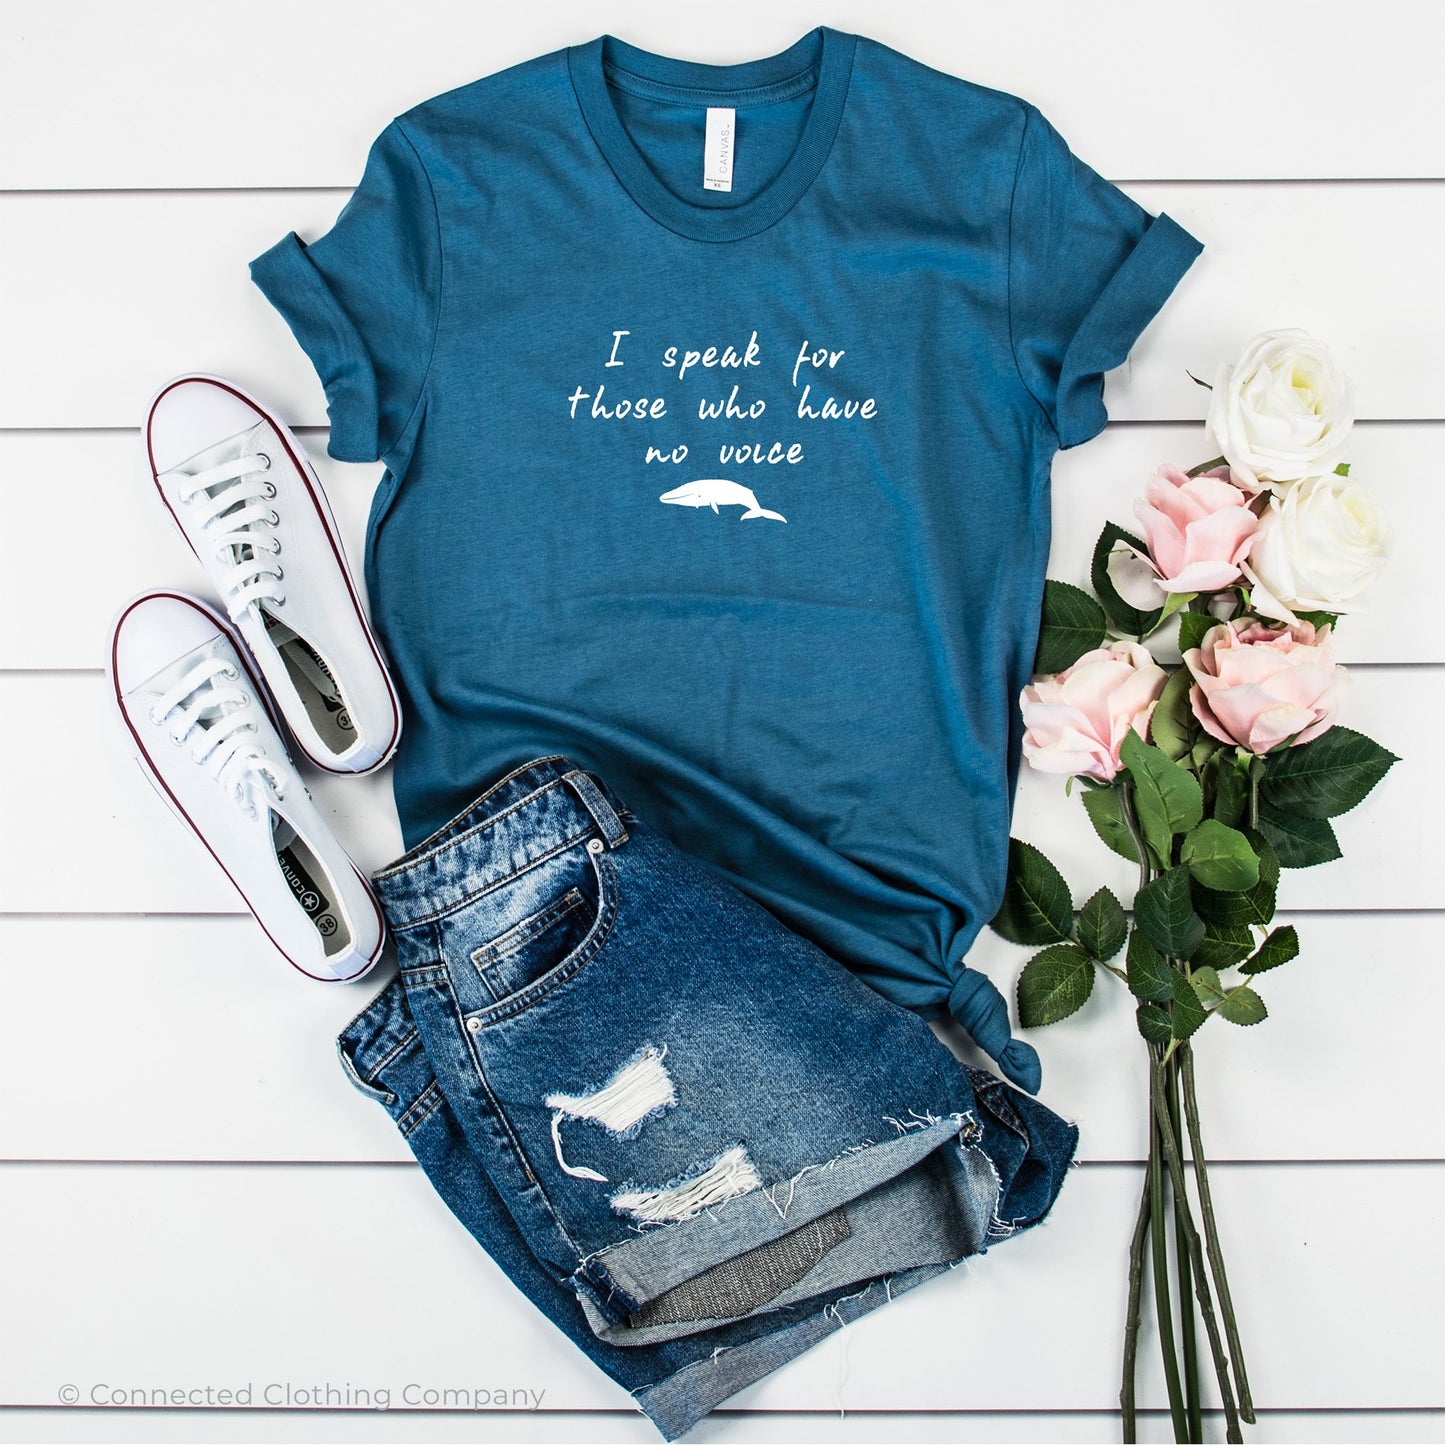 Be The Voice Whale Unisex Short-Sleeve Tee in Steel Blue - Connected Clothing Company donates 10% of the profits from this t-shirt to Mission Blue ocean conservation